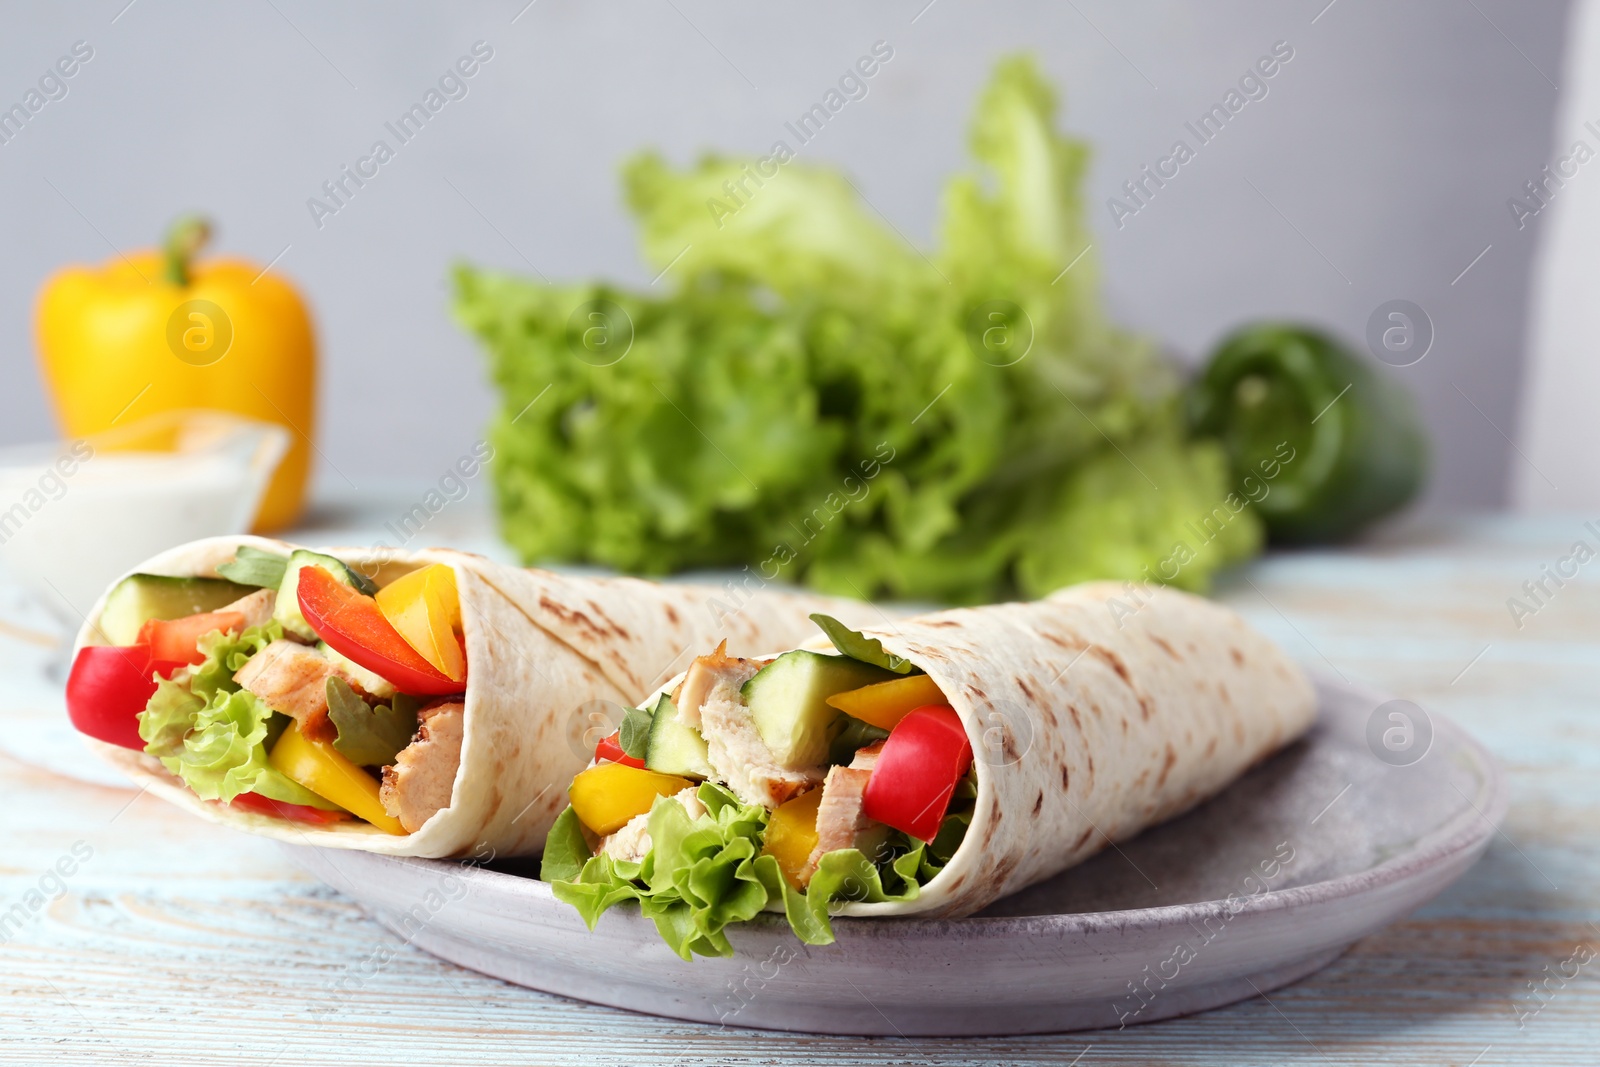 Photo of Plate with delicious meat tortilla wraps on white wooden table against grey background